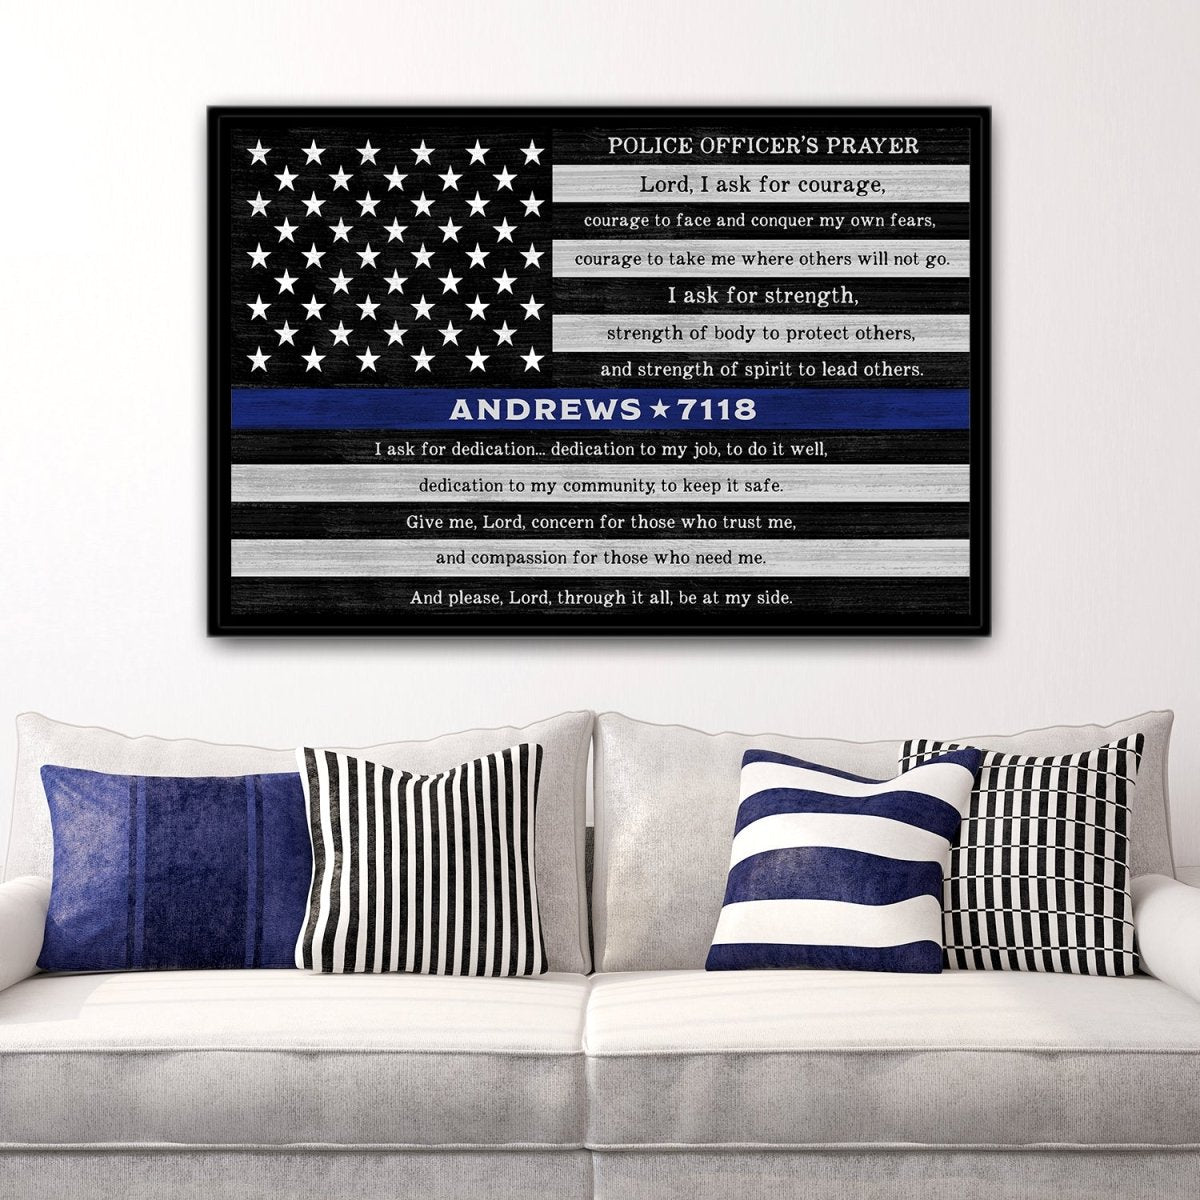 Police Officer Prayer Sign With Name and Badge Number Above Couch in Living Room - Pretty Perfect Studio